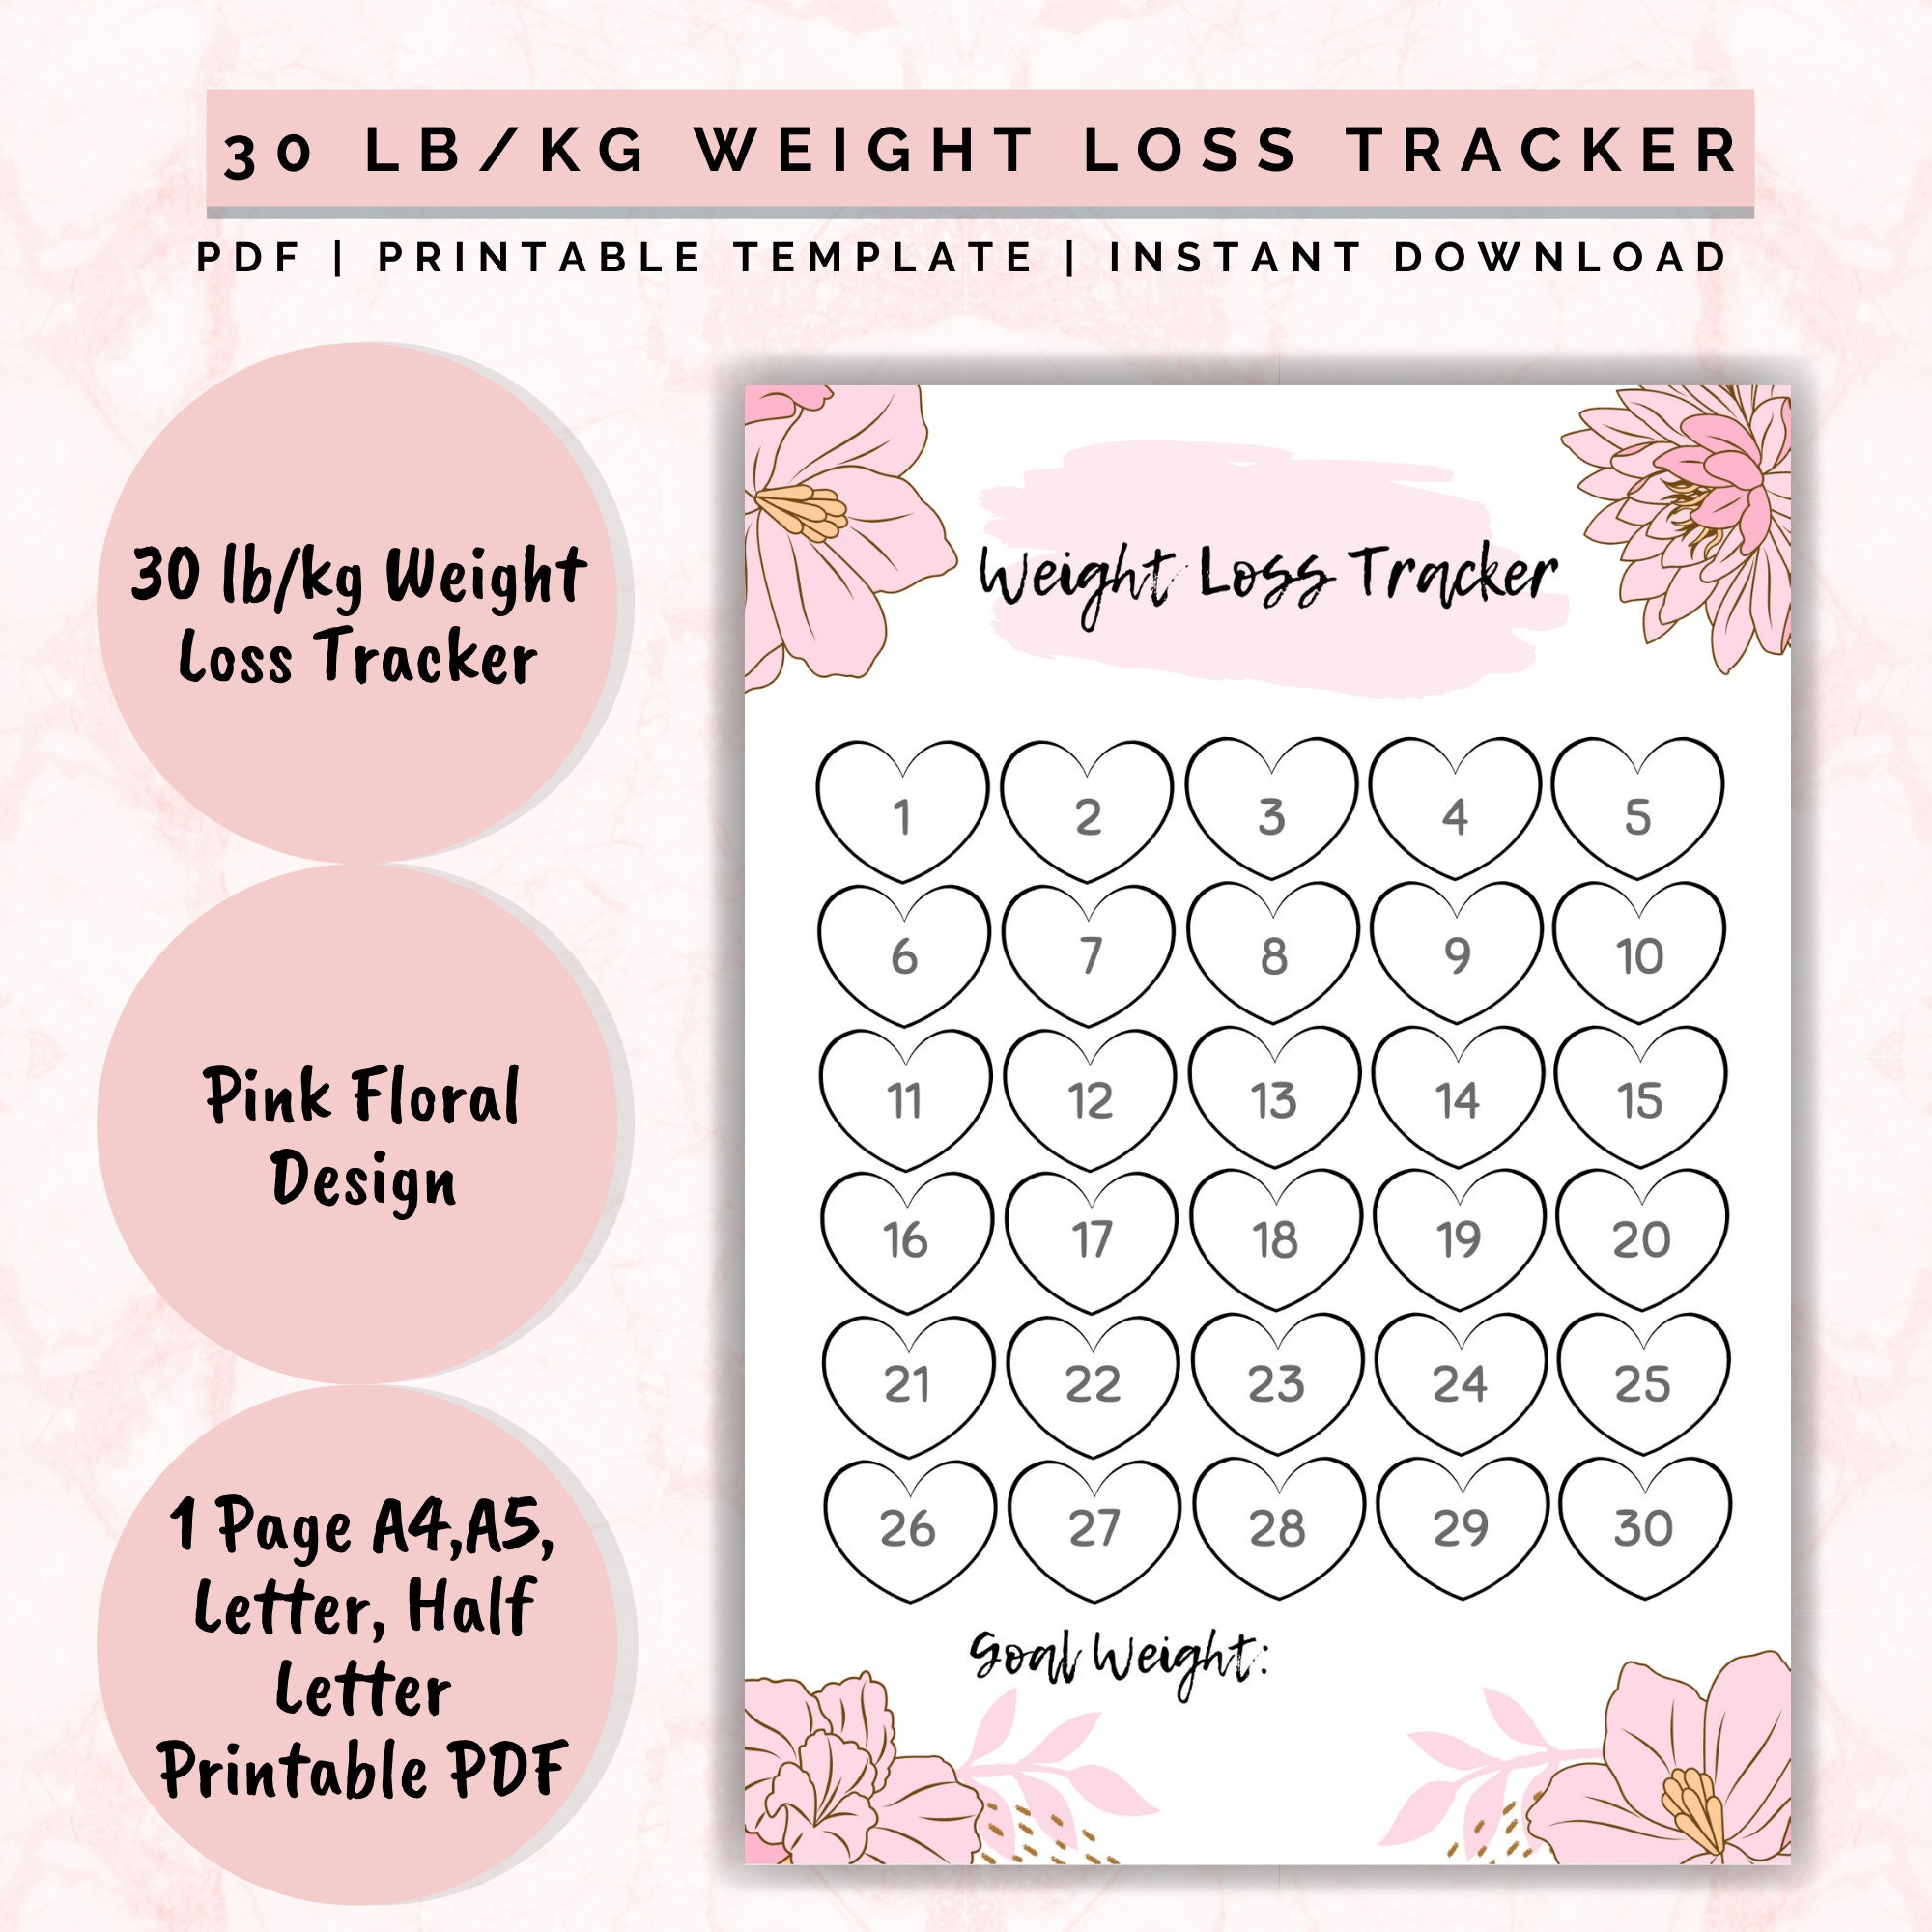 Weight Loss Tracker Printable 30 Lb kg Weight Loss Chart Etsy